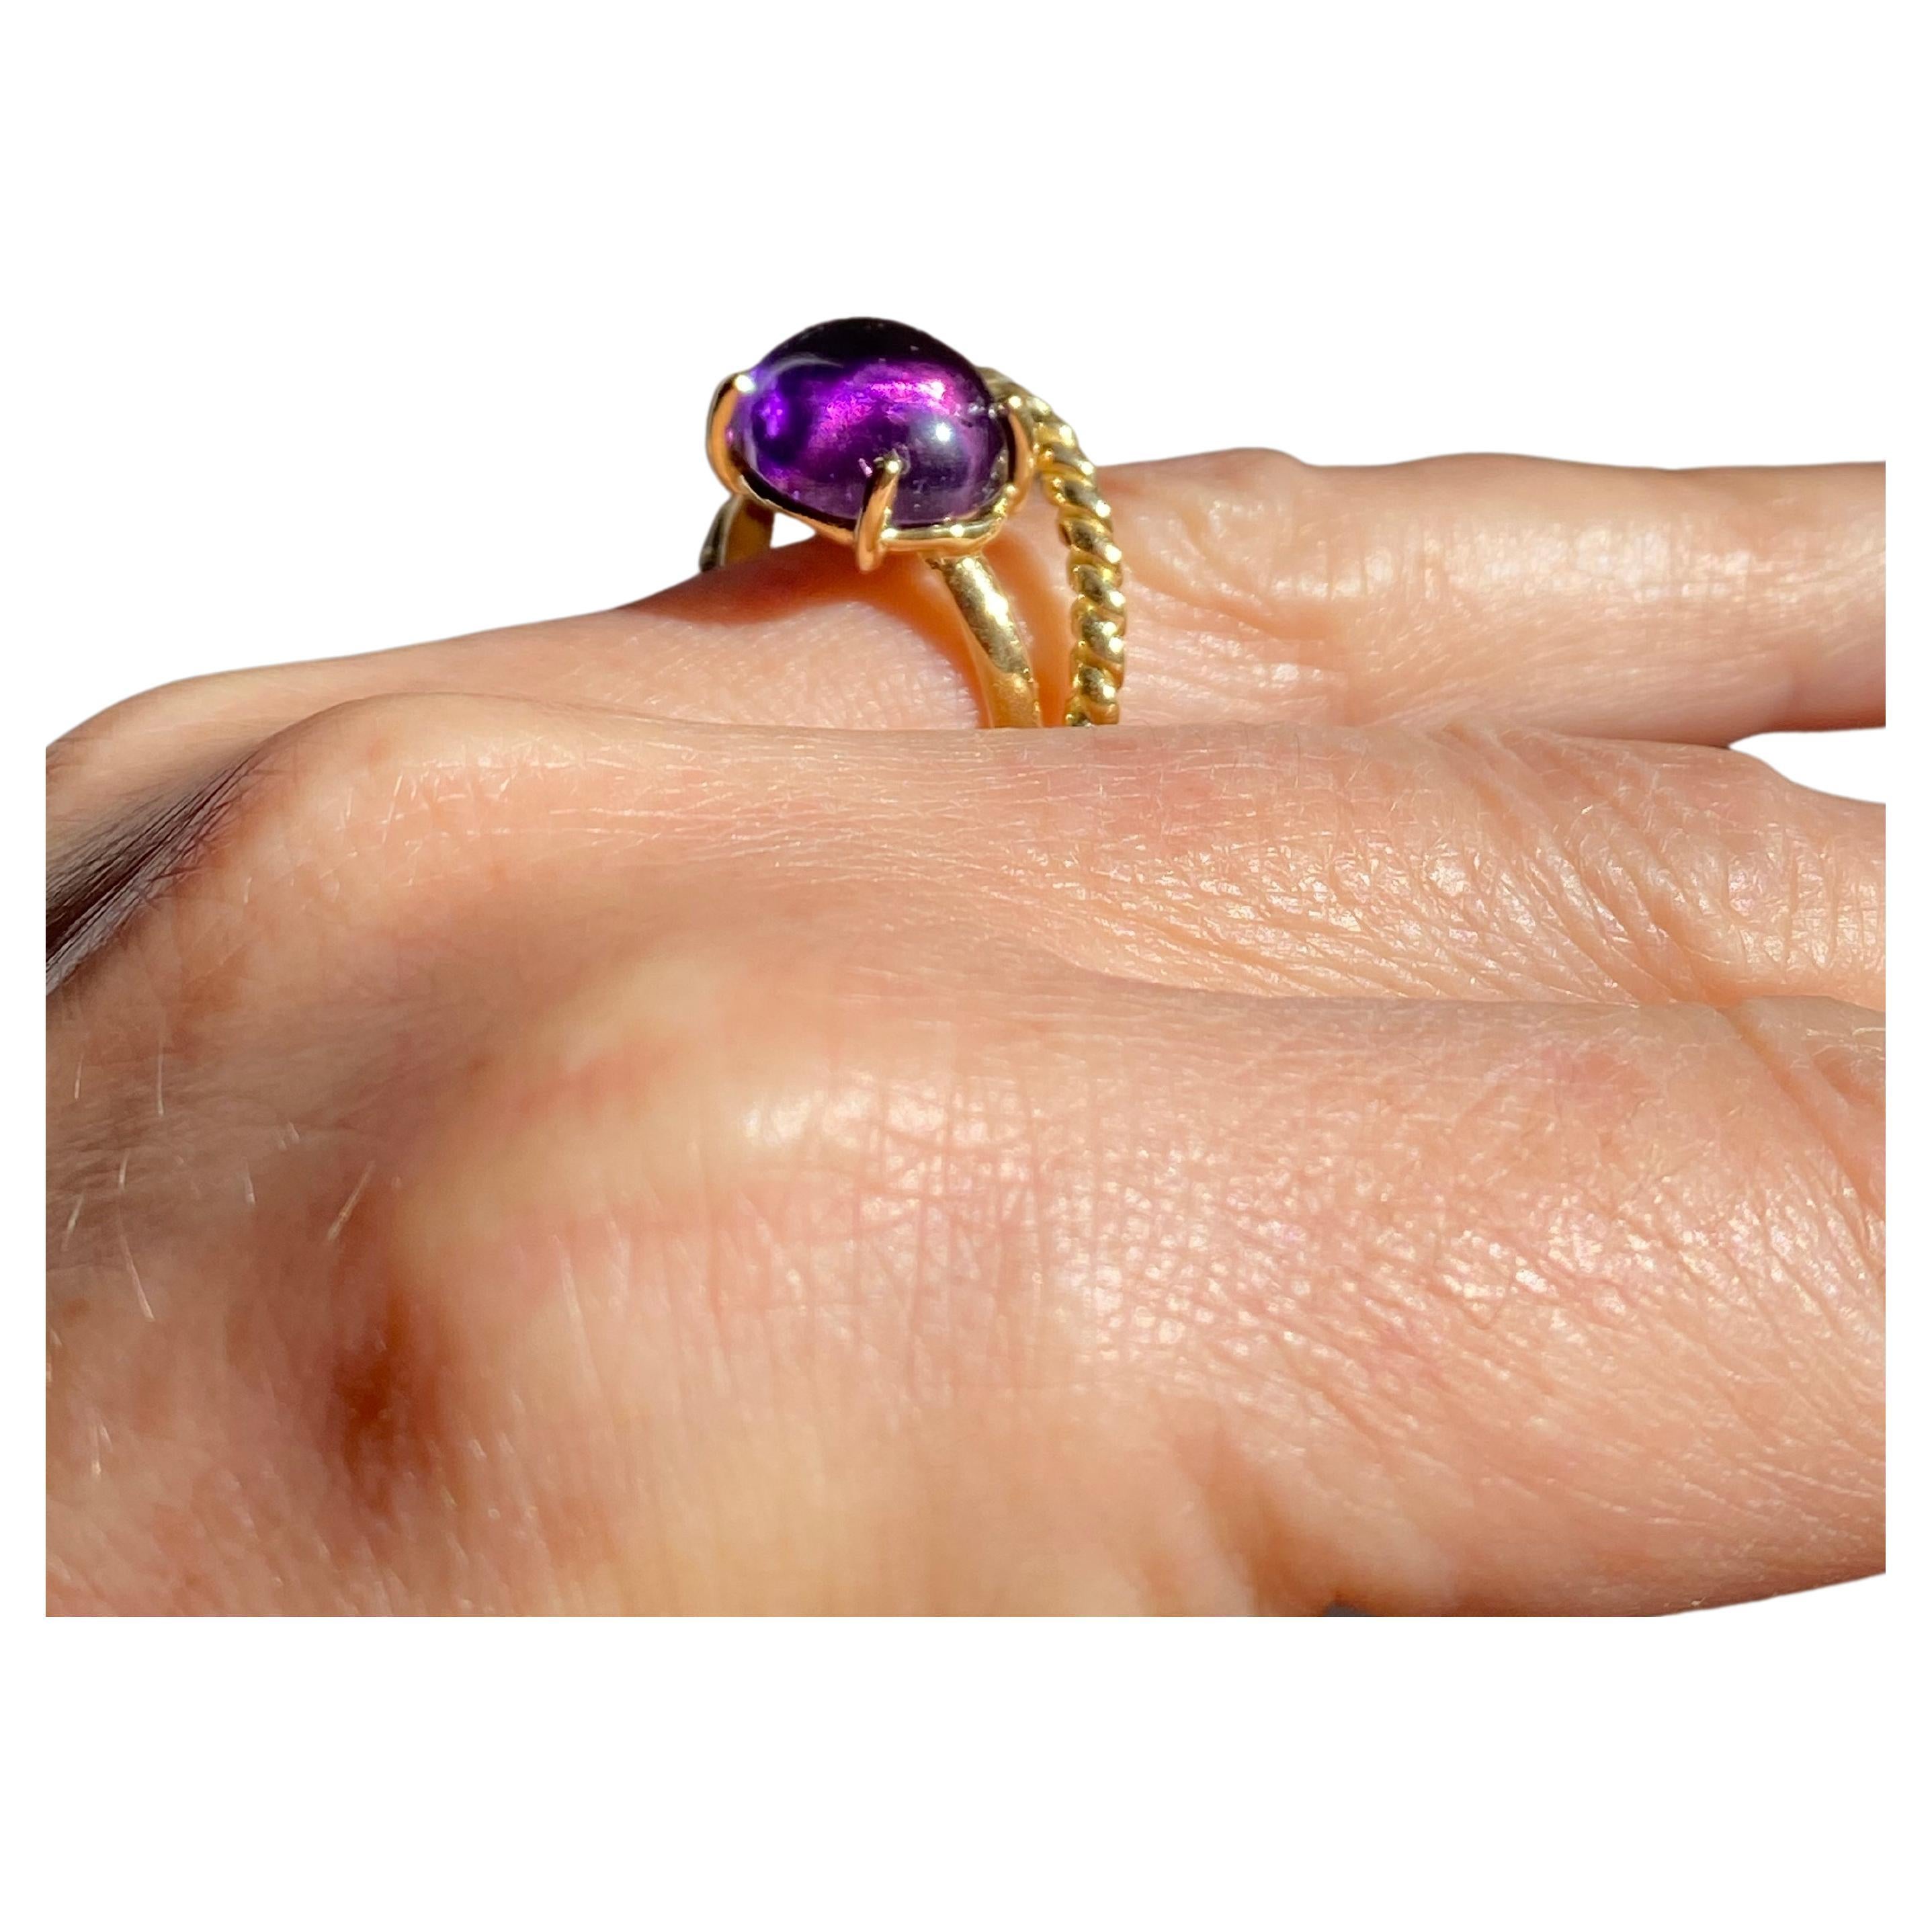 Rossella Ugolini design collection Modern 18 Karat Yellow Gold Twist Love Amethyst Handcrafted Design Ring. Inspired by the union of two loves that twist together in a single ring,  this design ring it is an amulet that wishes love for oneself and